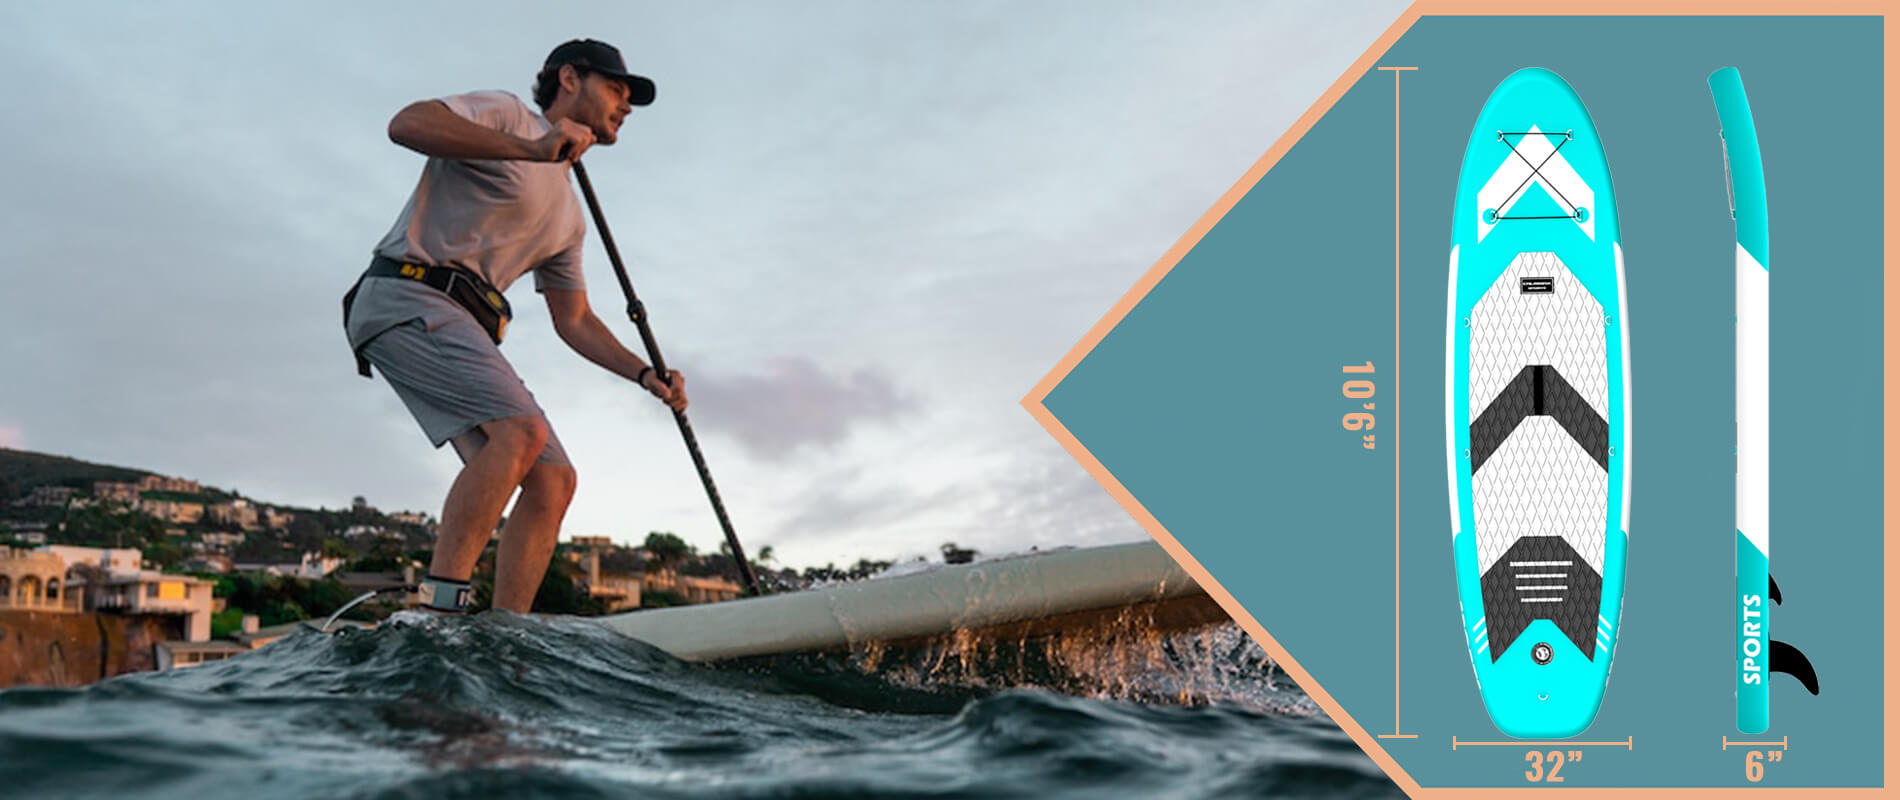 THREE STEPS TO KNOW STAND UP PADDLE BOARD FOR BEGINNERS